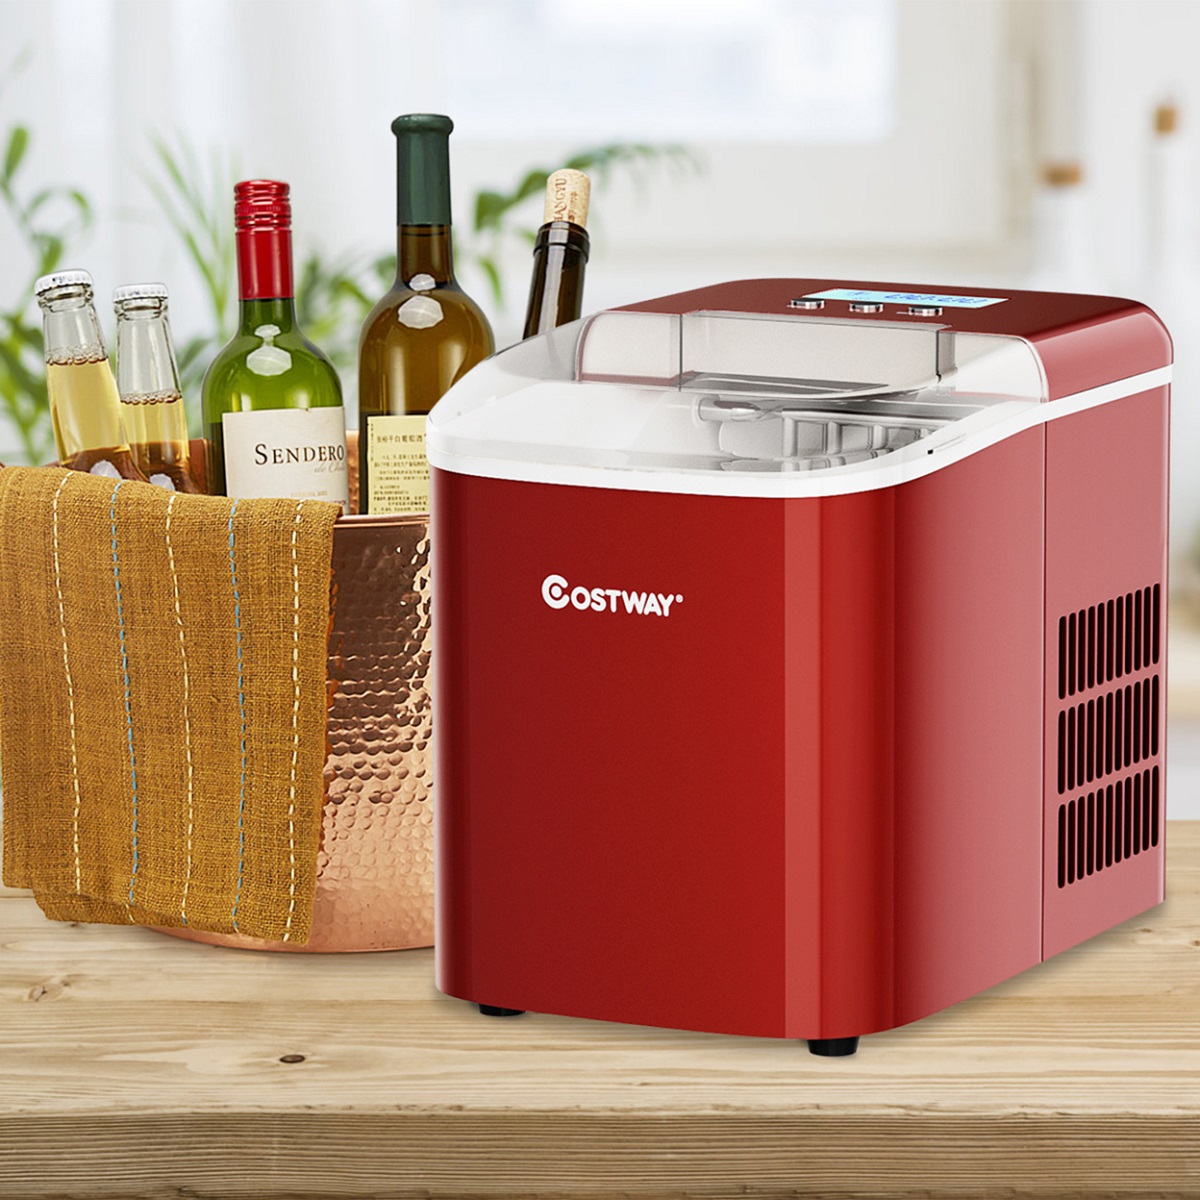 What Is The Best Counter Ice Maker